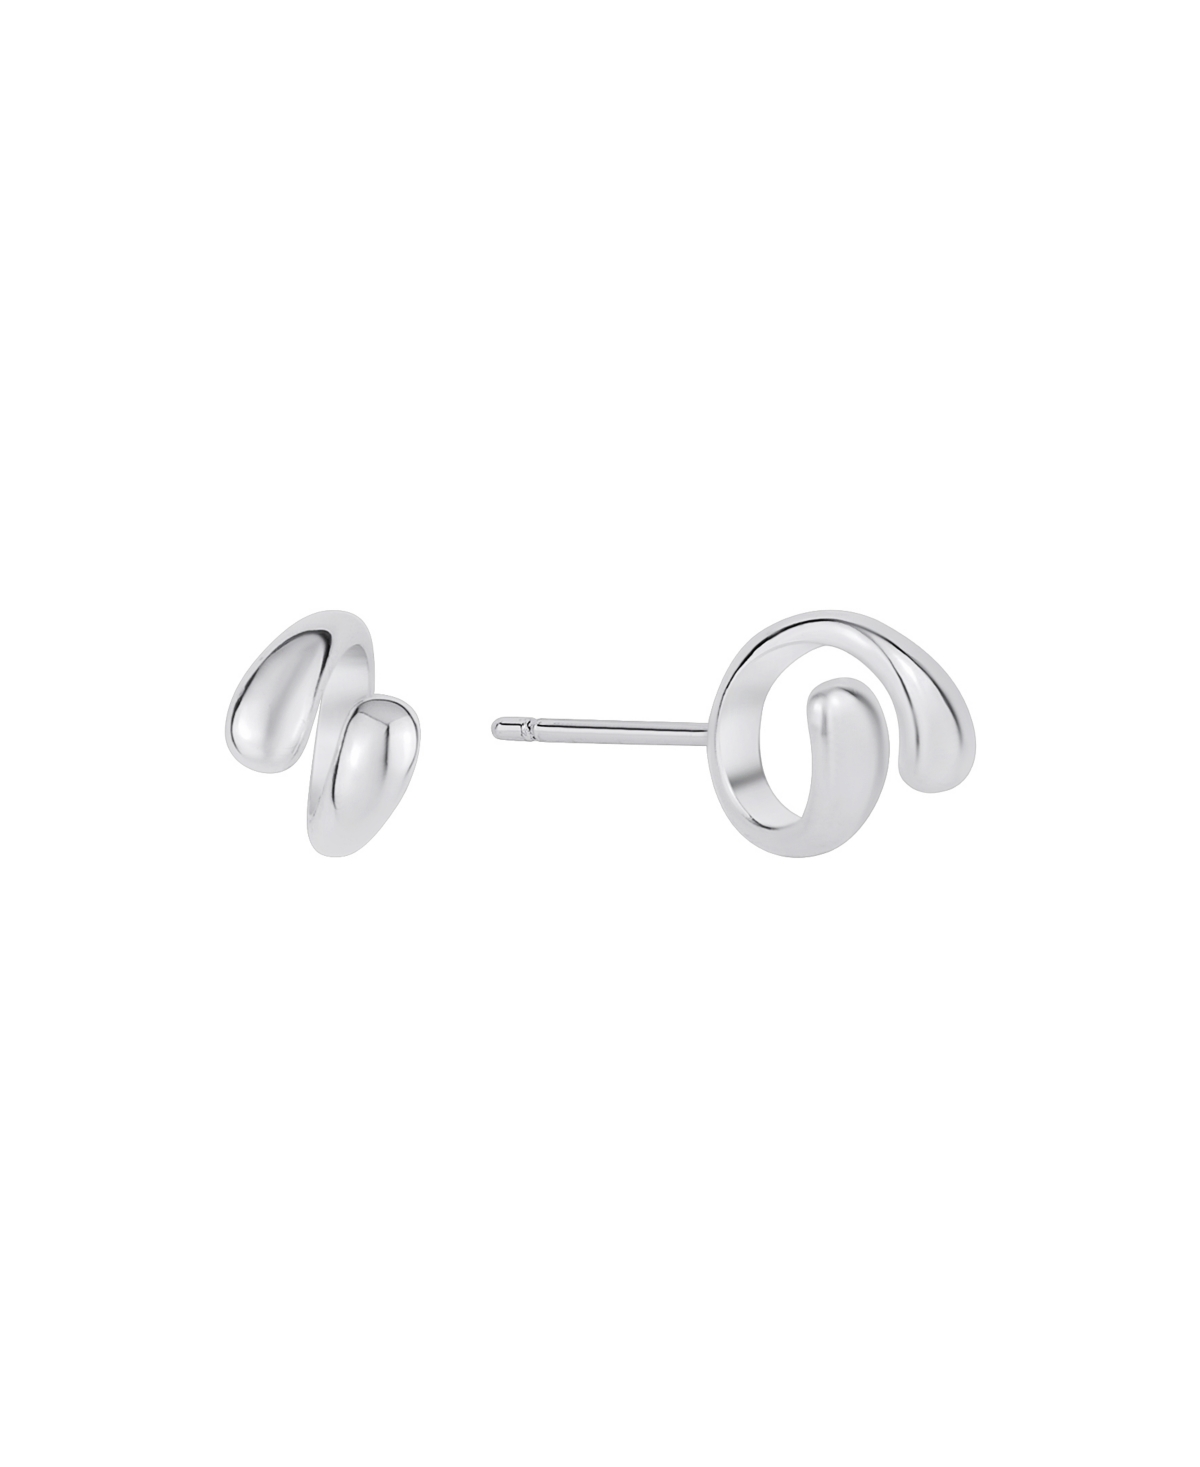 And Now This Silver Plated Ear Bud Holder Earring In White